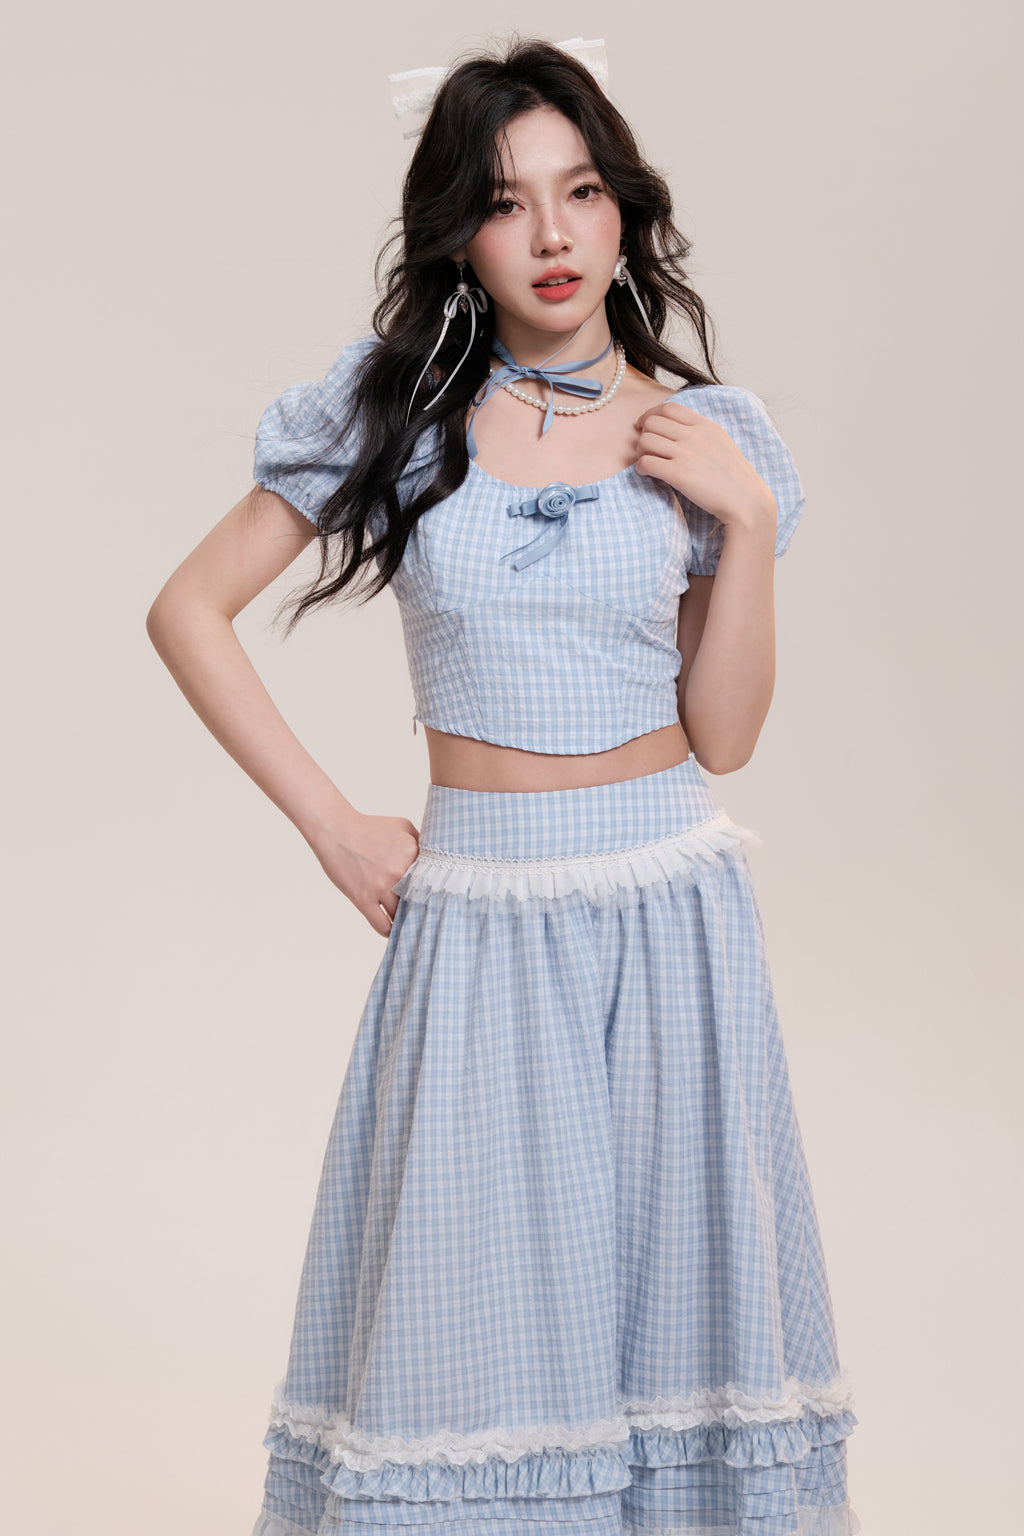 Rose Lace Plaid Puff Sleeve Top/Long Skirt AOO0005